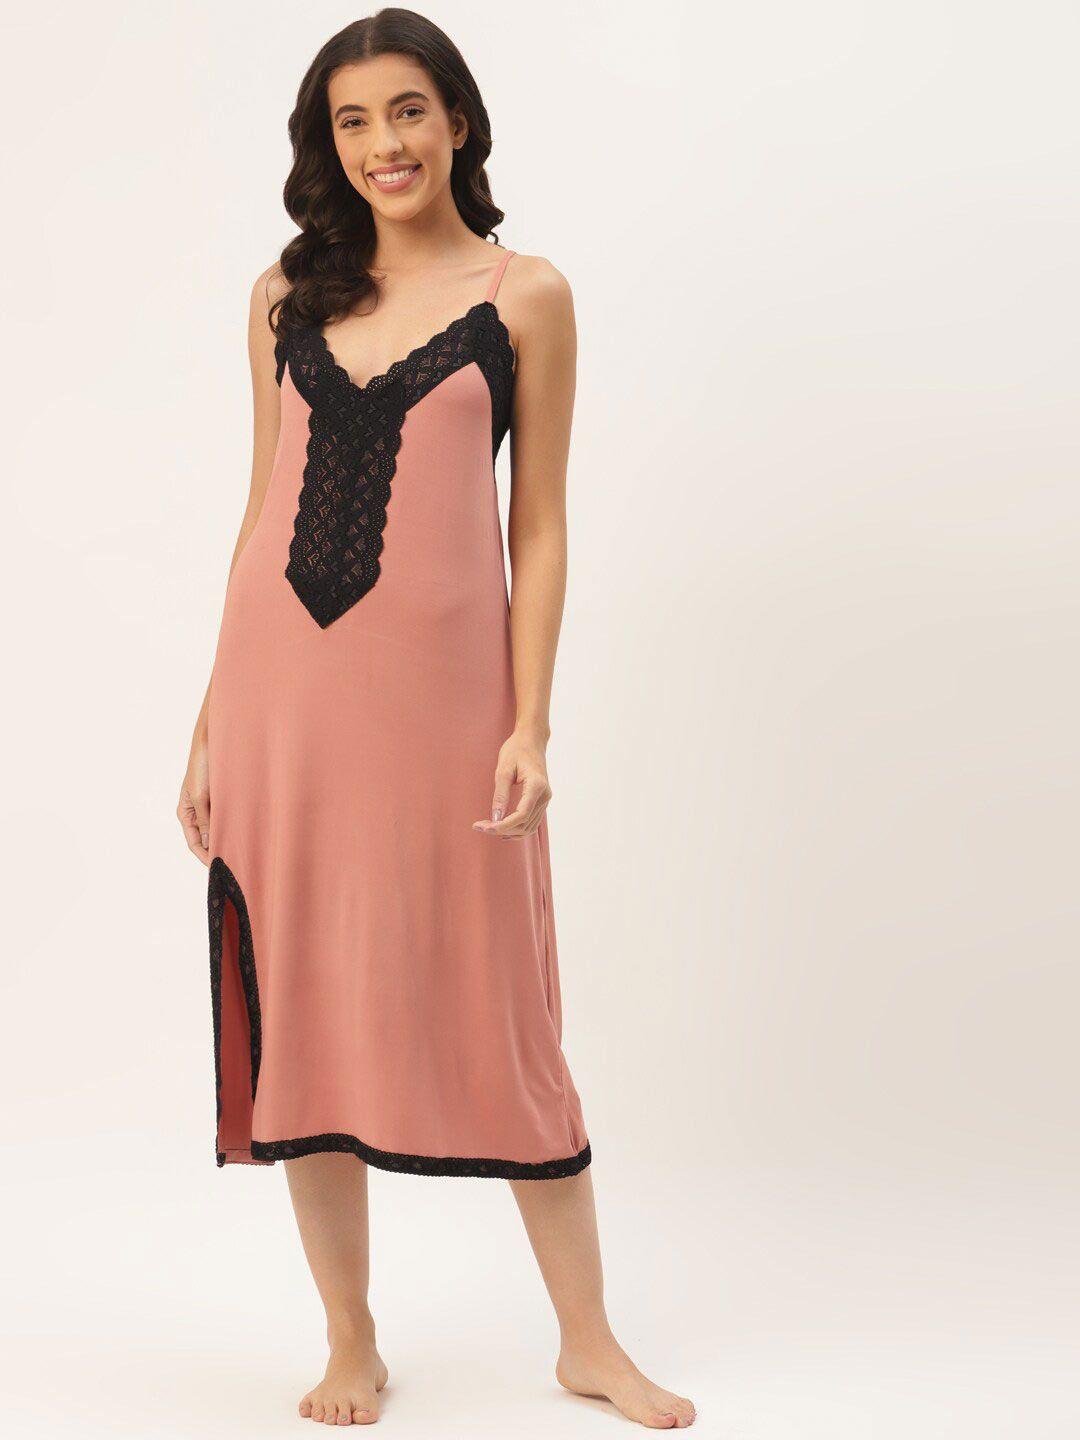 ms.lingies v neck lace up detail nightdress